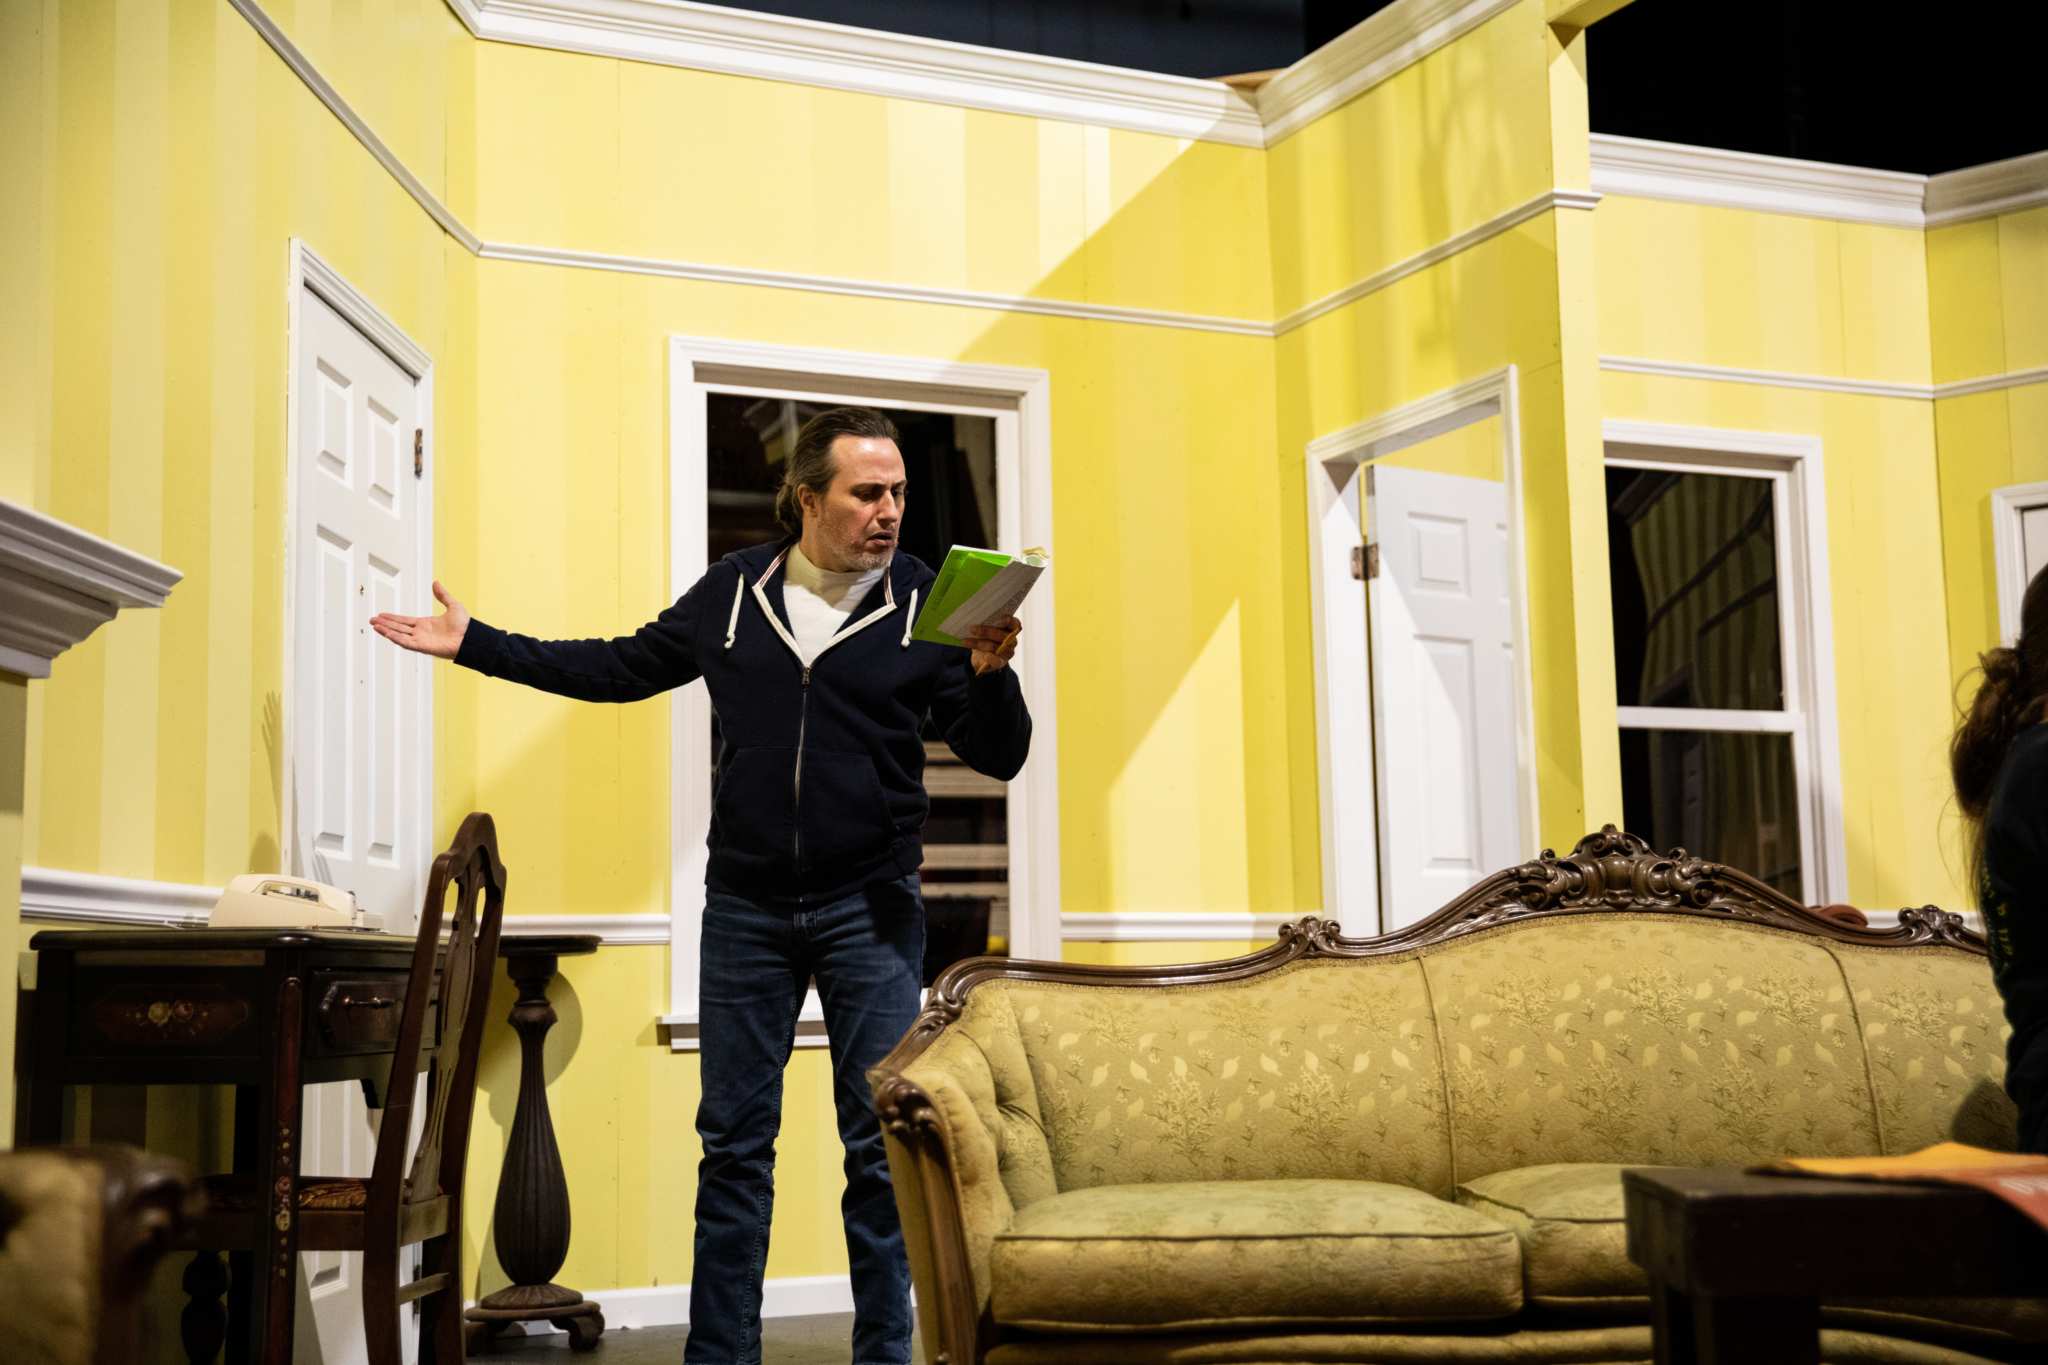 VST Plaza Suite 5 Exclusive look: Discover Plaza Suite, a comedy showing at the Virginia Samford Theatre April 15-25